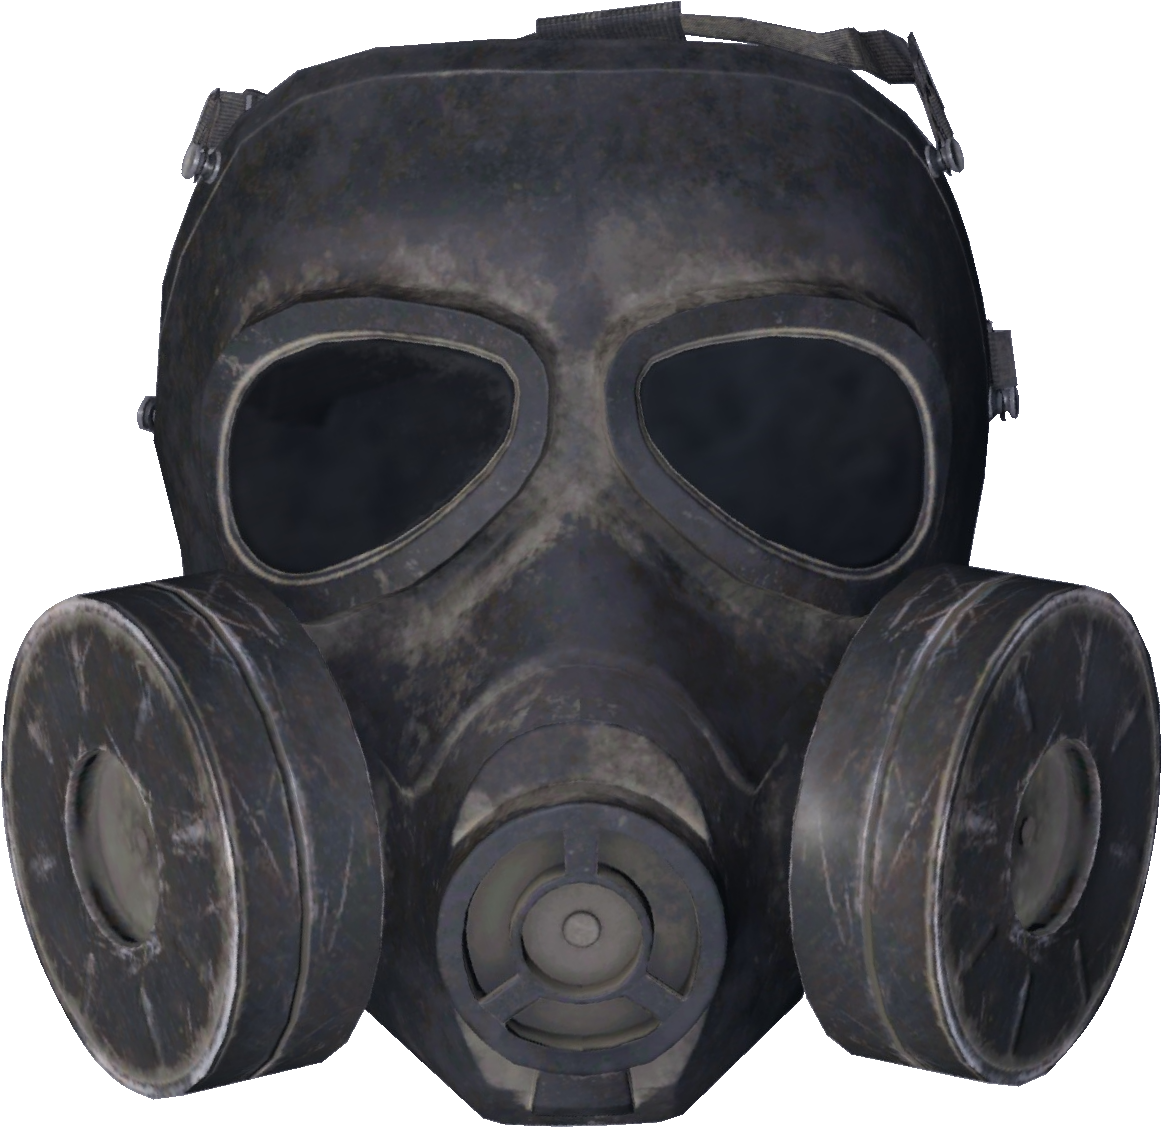 A Black Gas Mask With Large Round Holes